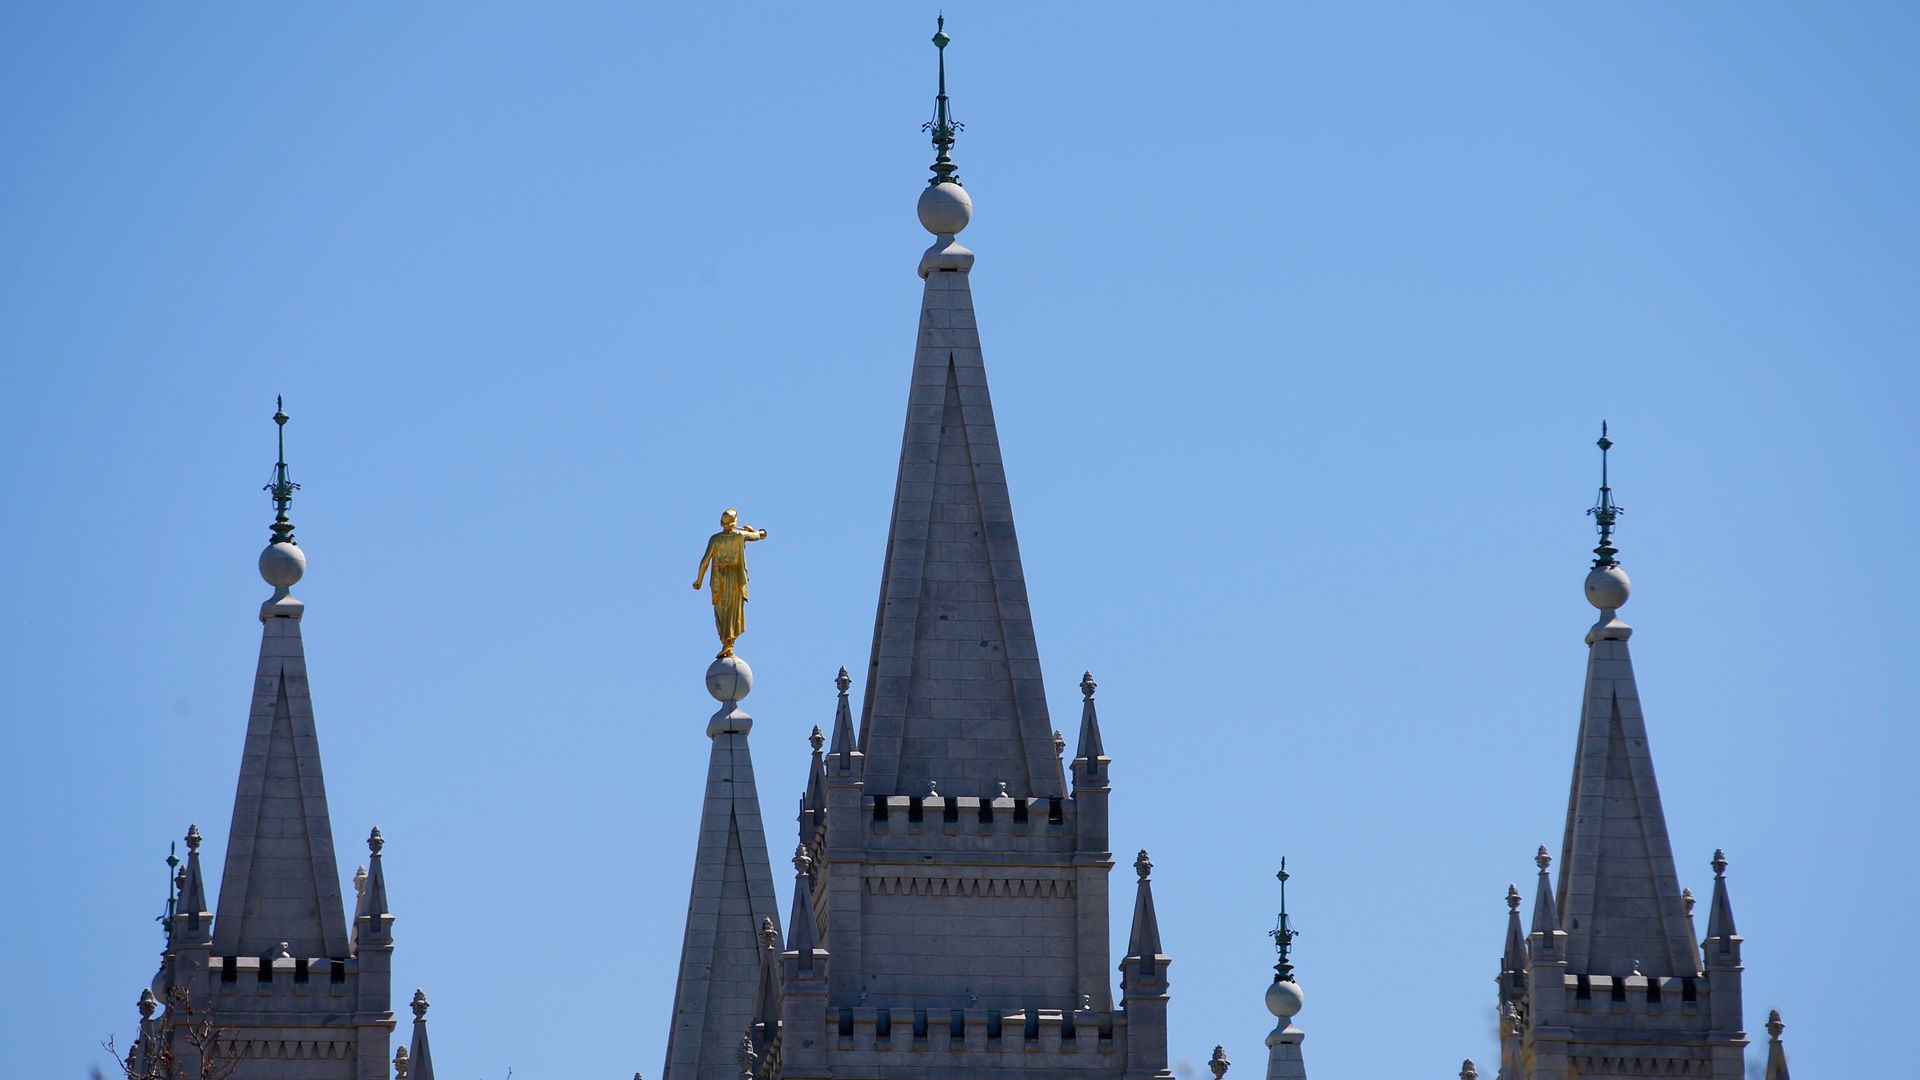 The spires of the Salt Lake City temple of the Church of Jesus Christ of Latter-day Saints.